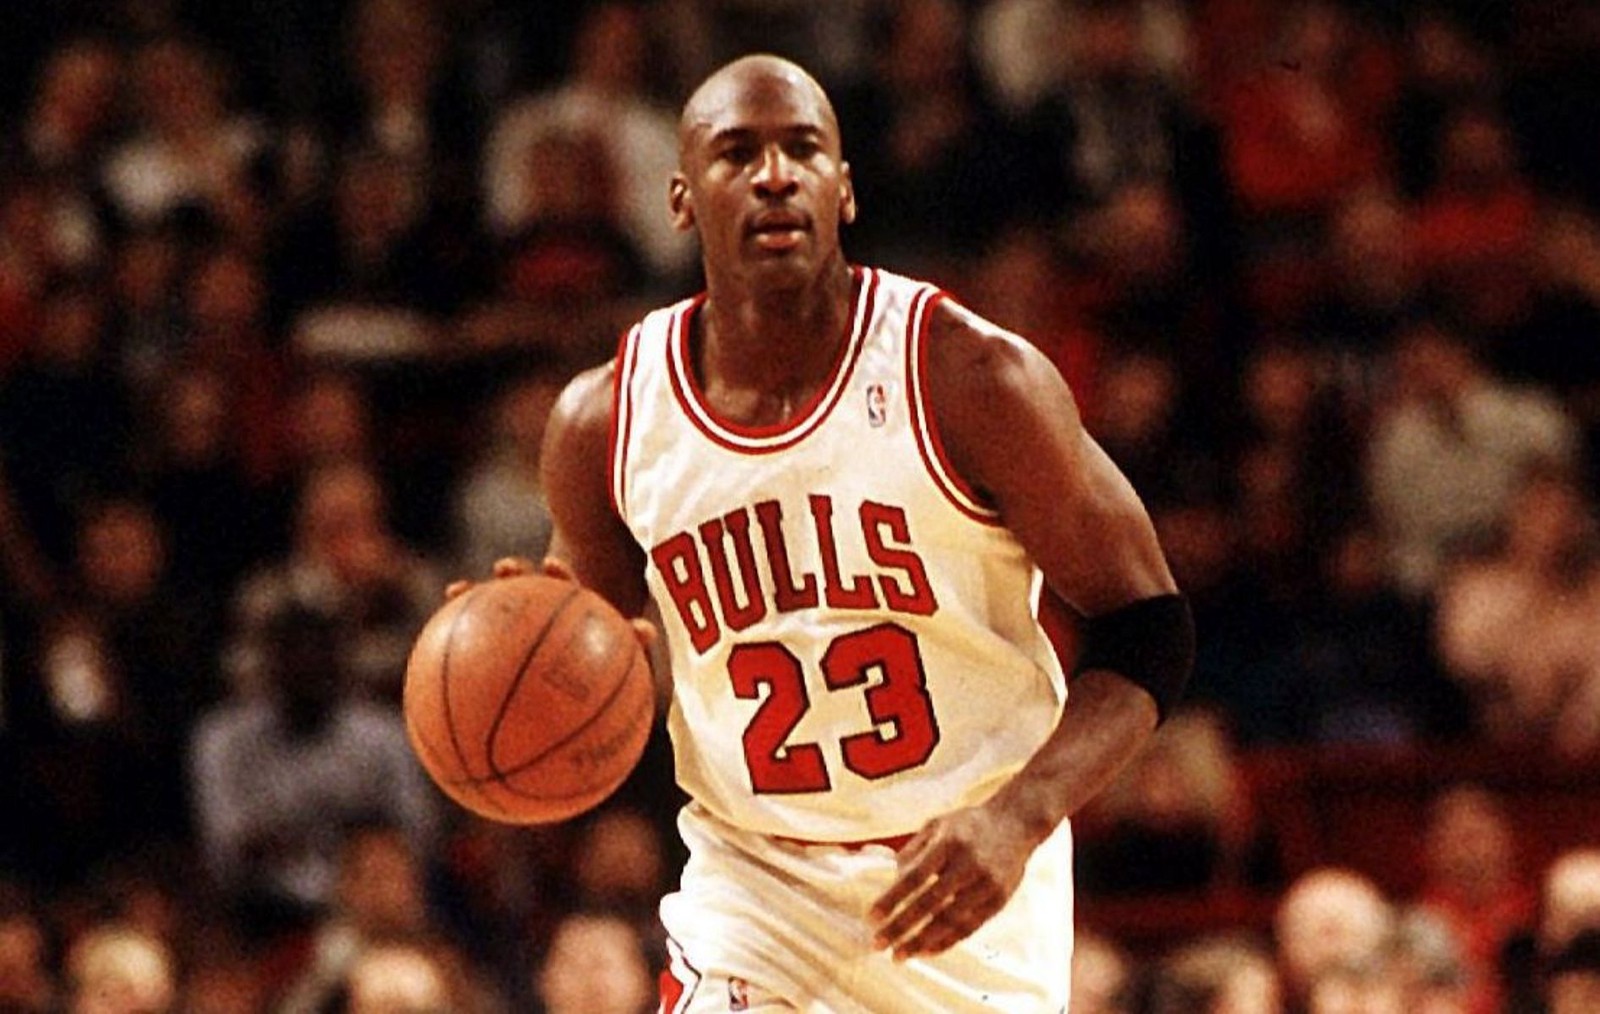 The Hardest Trivia Quiz You’ll Ever Take (Unless You Take the Easy Way Out) Michael Jordan